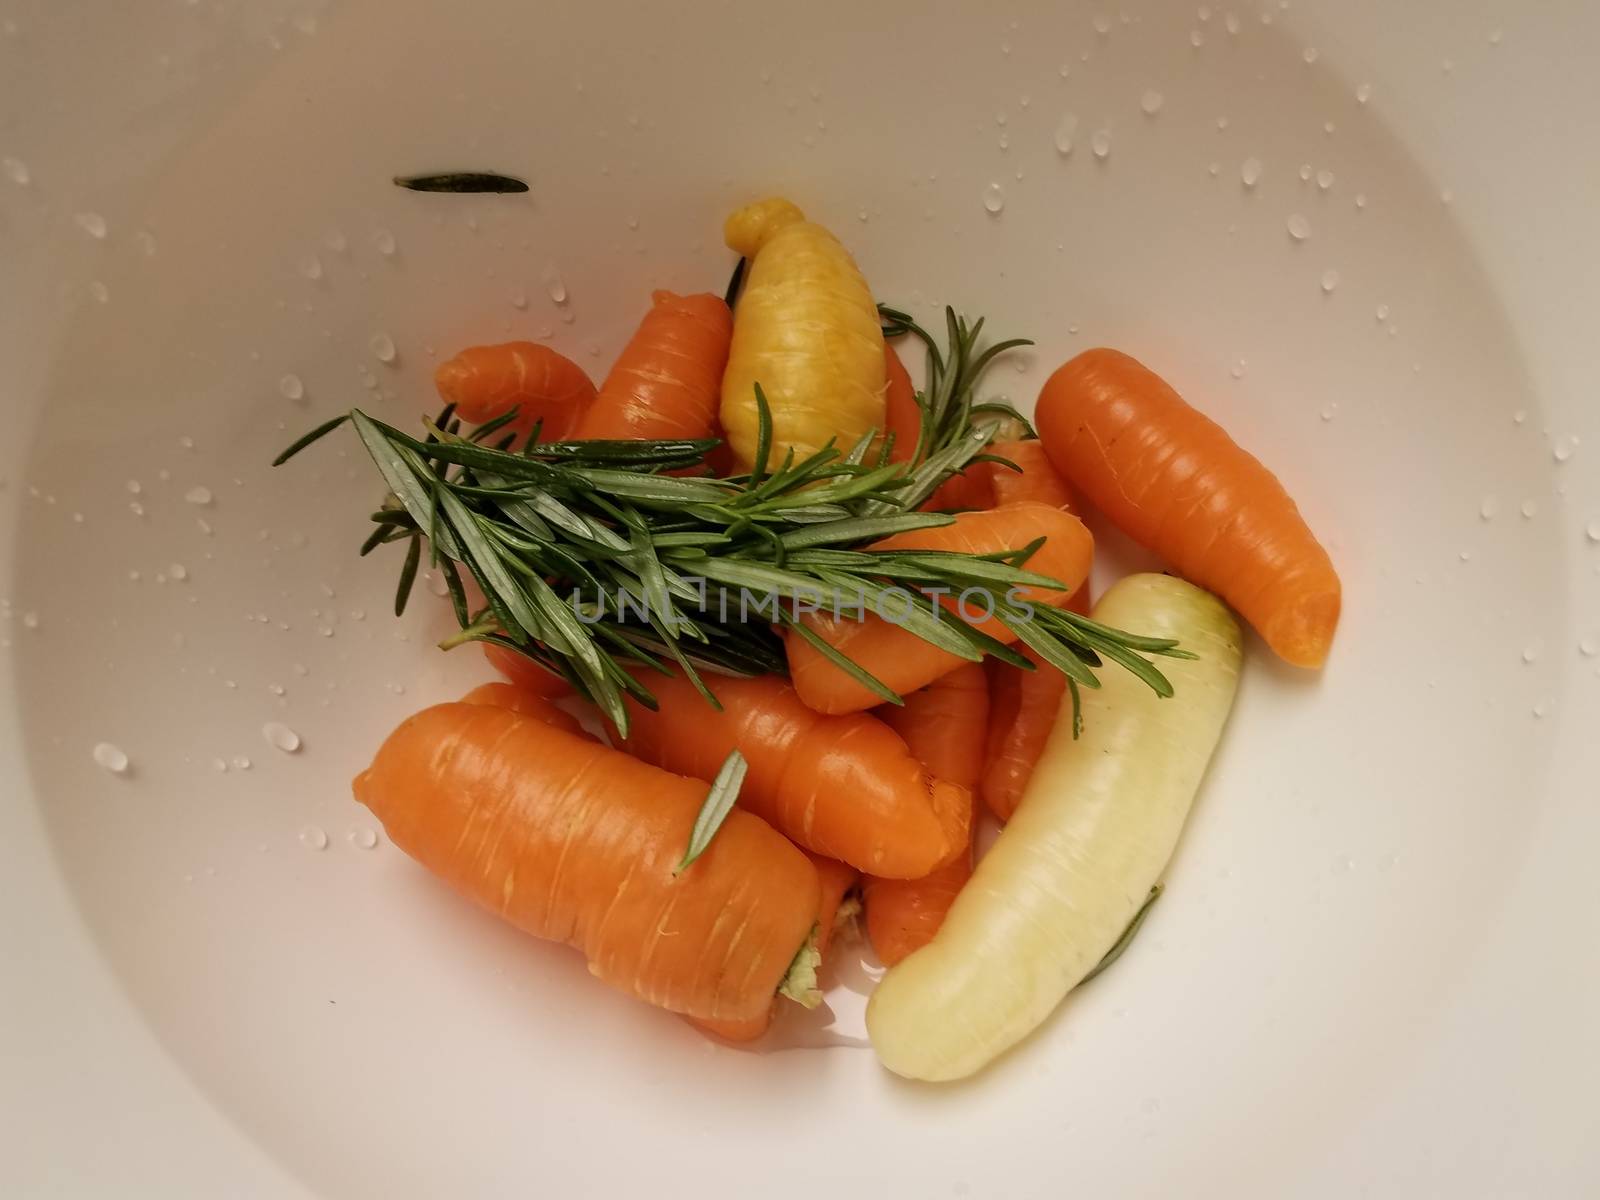 carrots and rosemary in white container or bowl by stockphotofan1